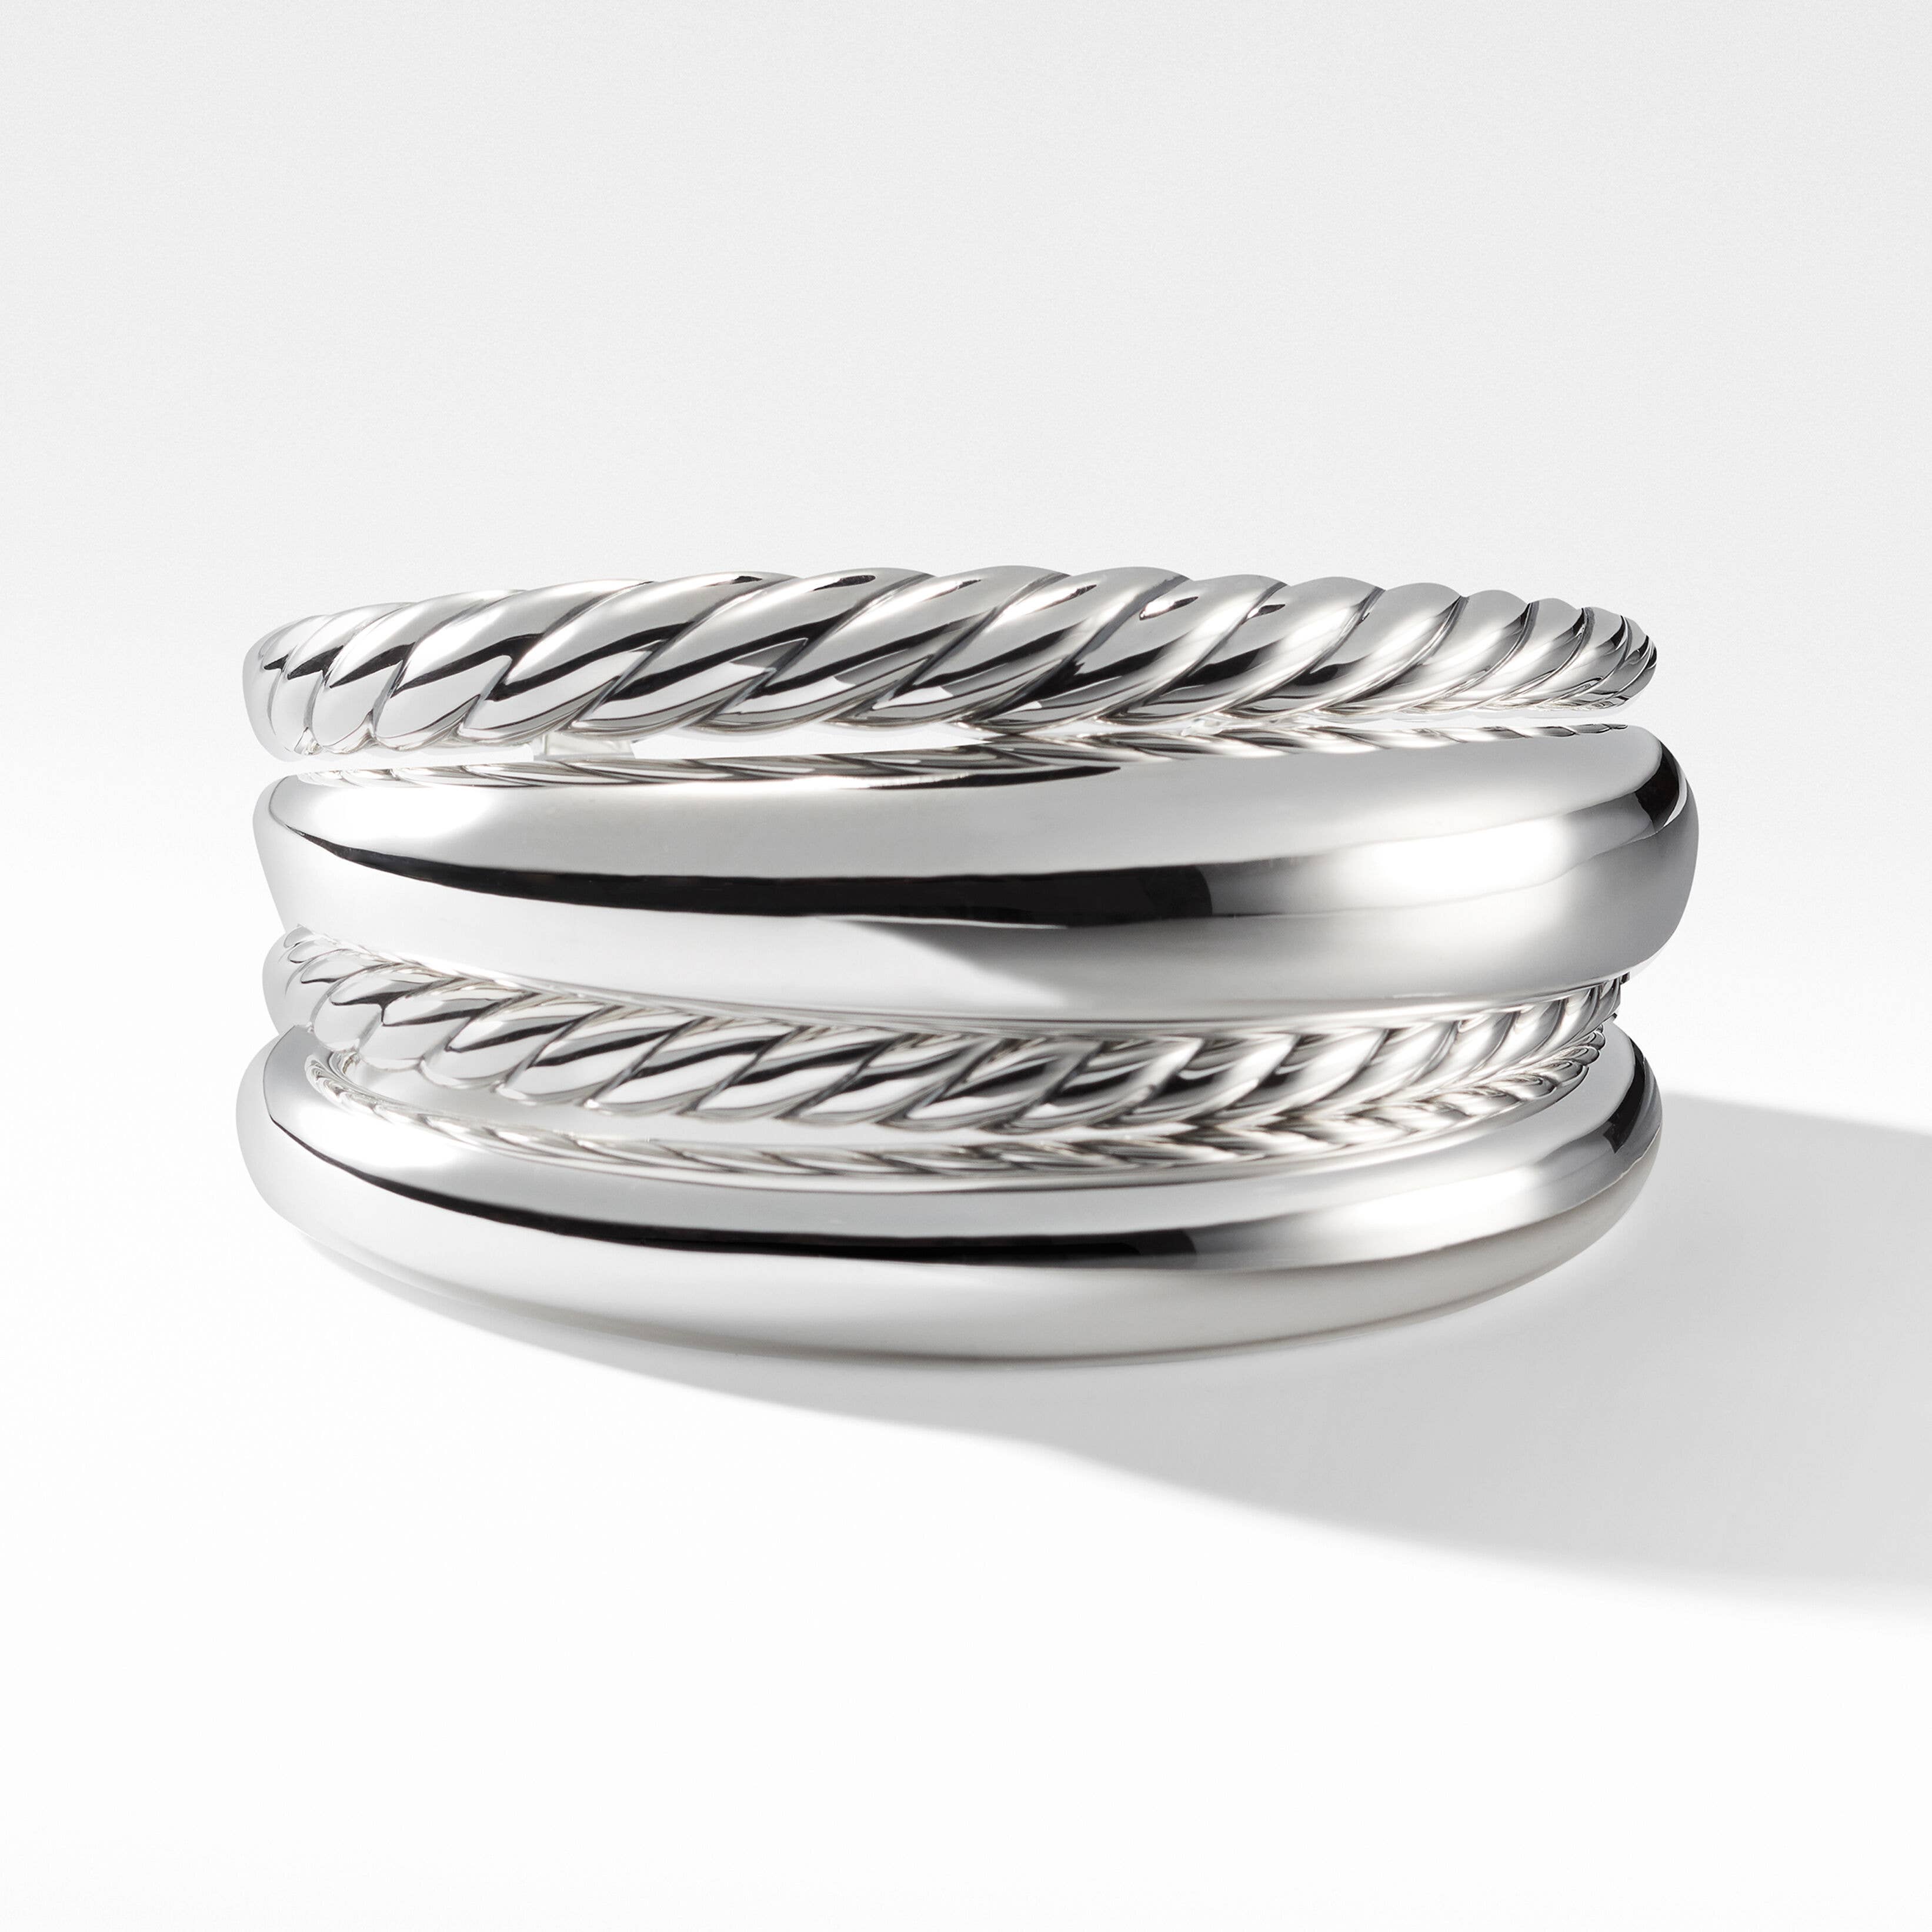 Pure Form® Four Row Cuff Bracelet in Sterling Silver